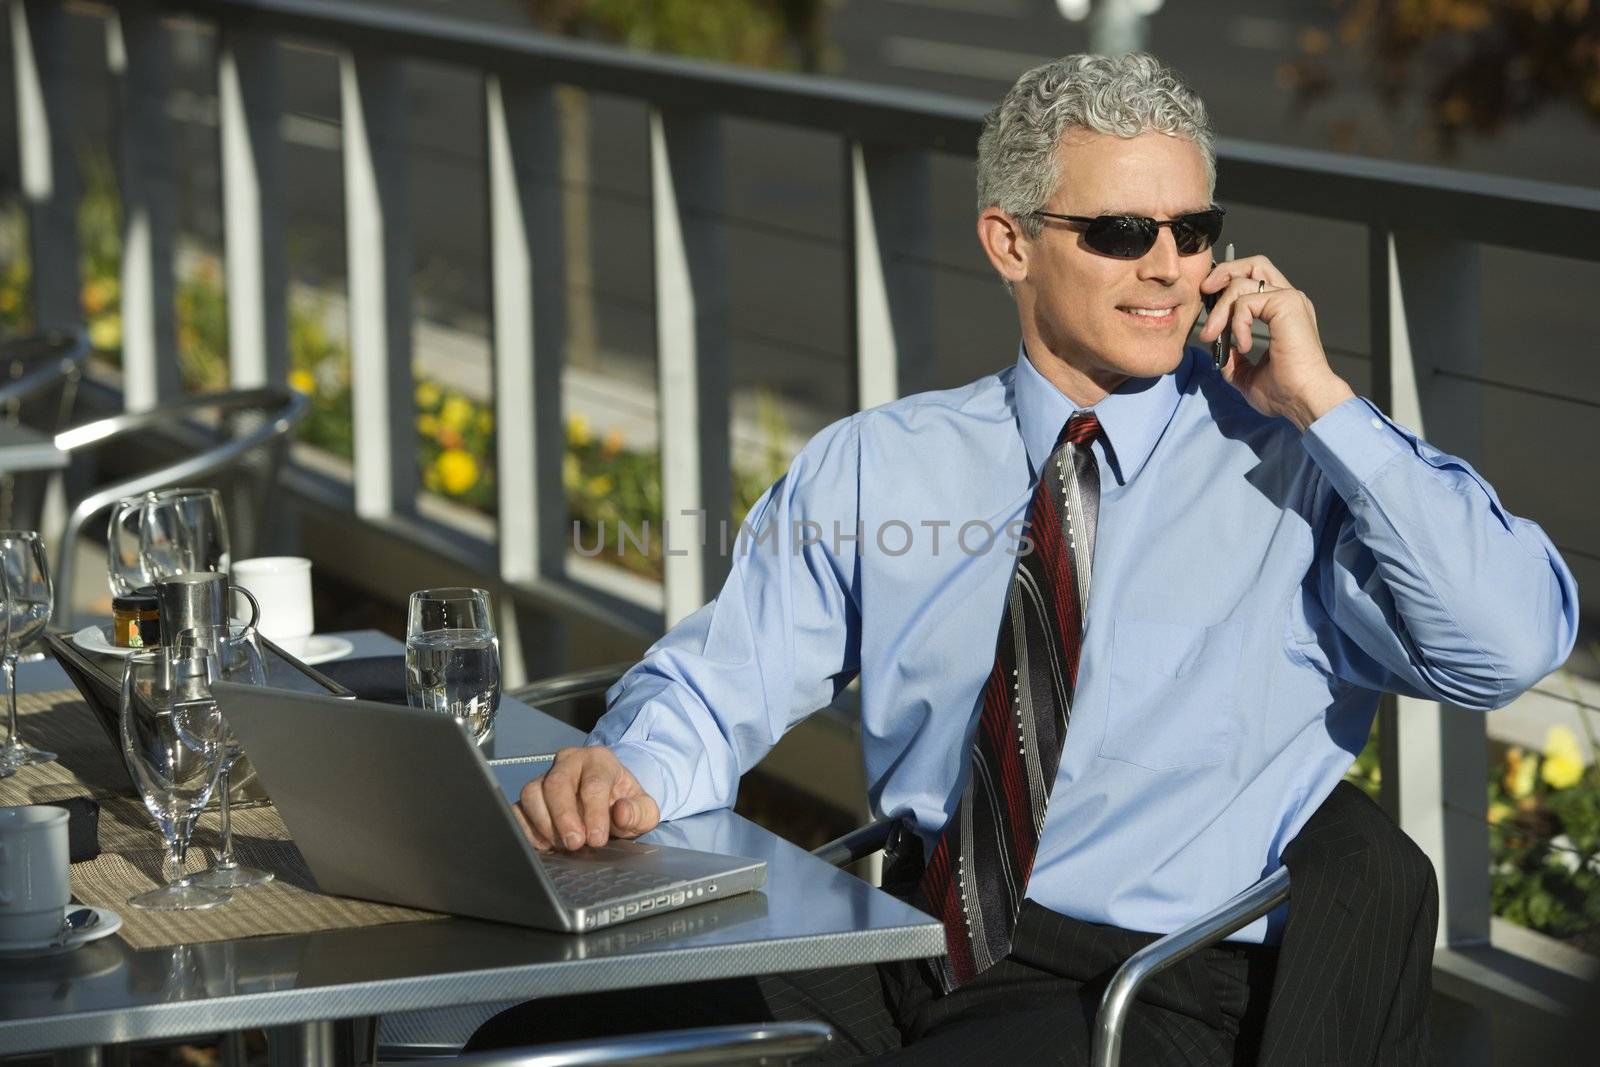 Prime adult Caucasian man in suit sitting at patio table ouside with laptop and talking on cellphone.